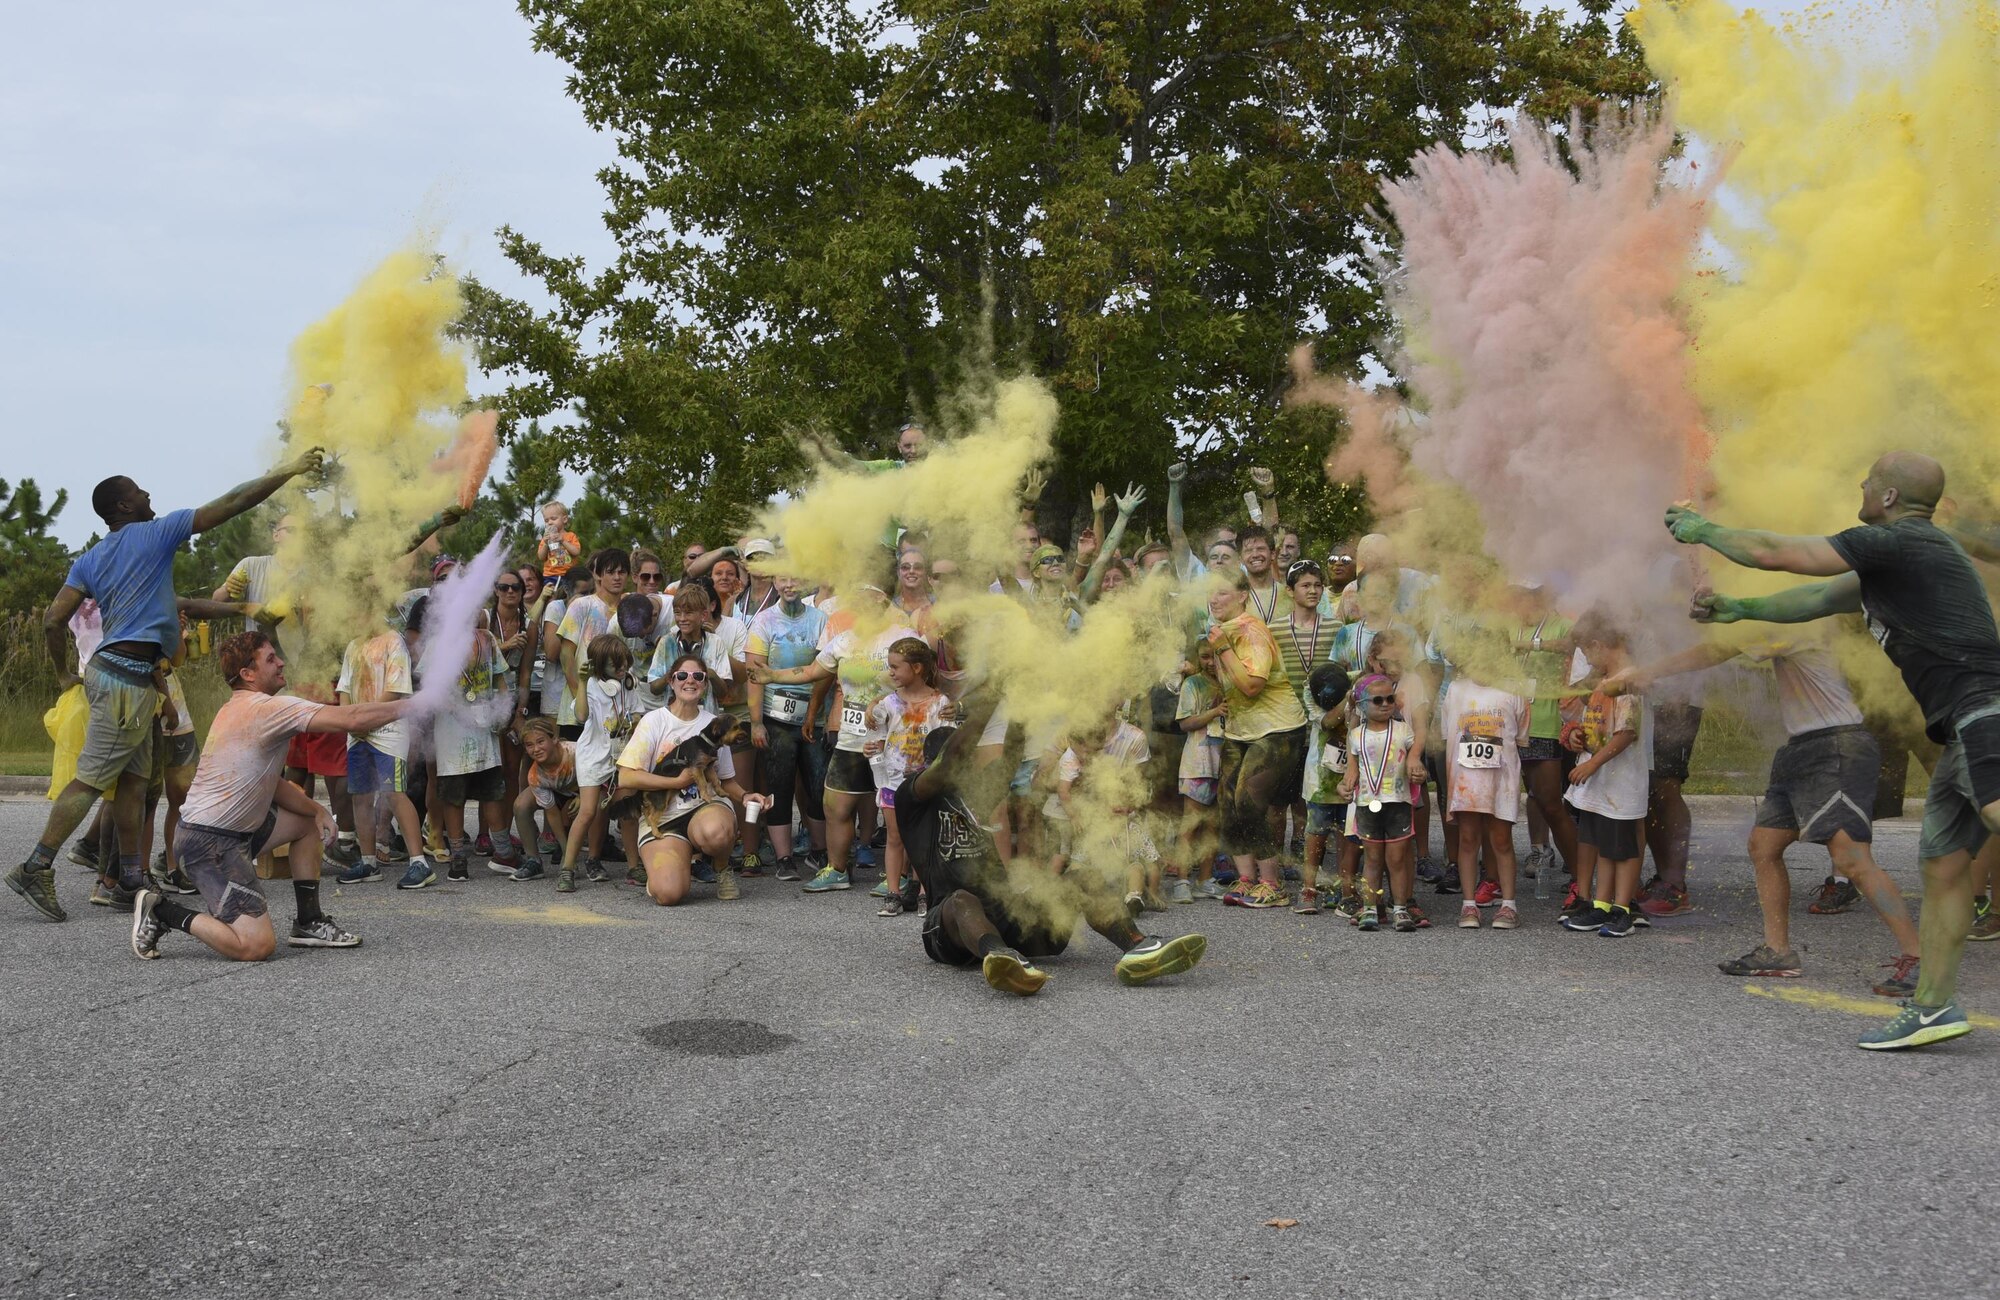 – In a multi-tiered effort to raise esprit de corps, community outreach, and raise money for the 2017 Tyndall Air Force Ball, Tyndall hosted its second annual 5K color run/walk Aug. 26, 2017.
The event allowed approximately 100 participants from Tyndall and the surrounding area to enjoy a fun run with their friends and family.